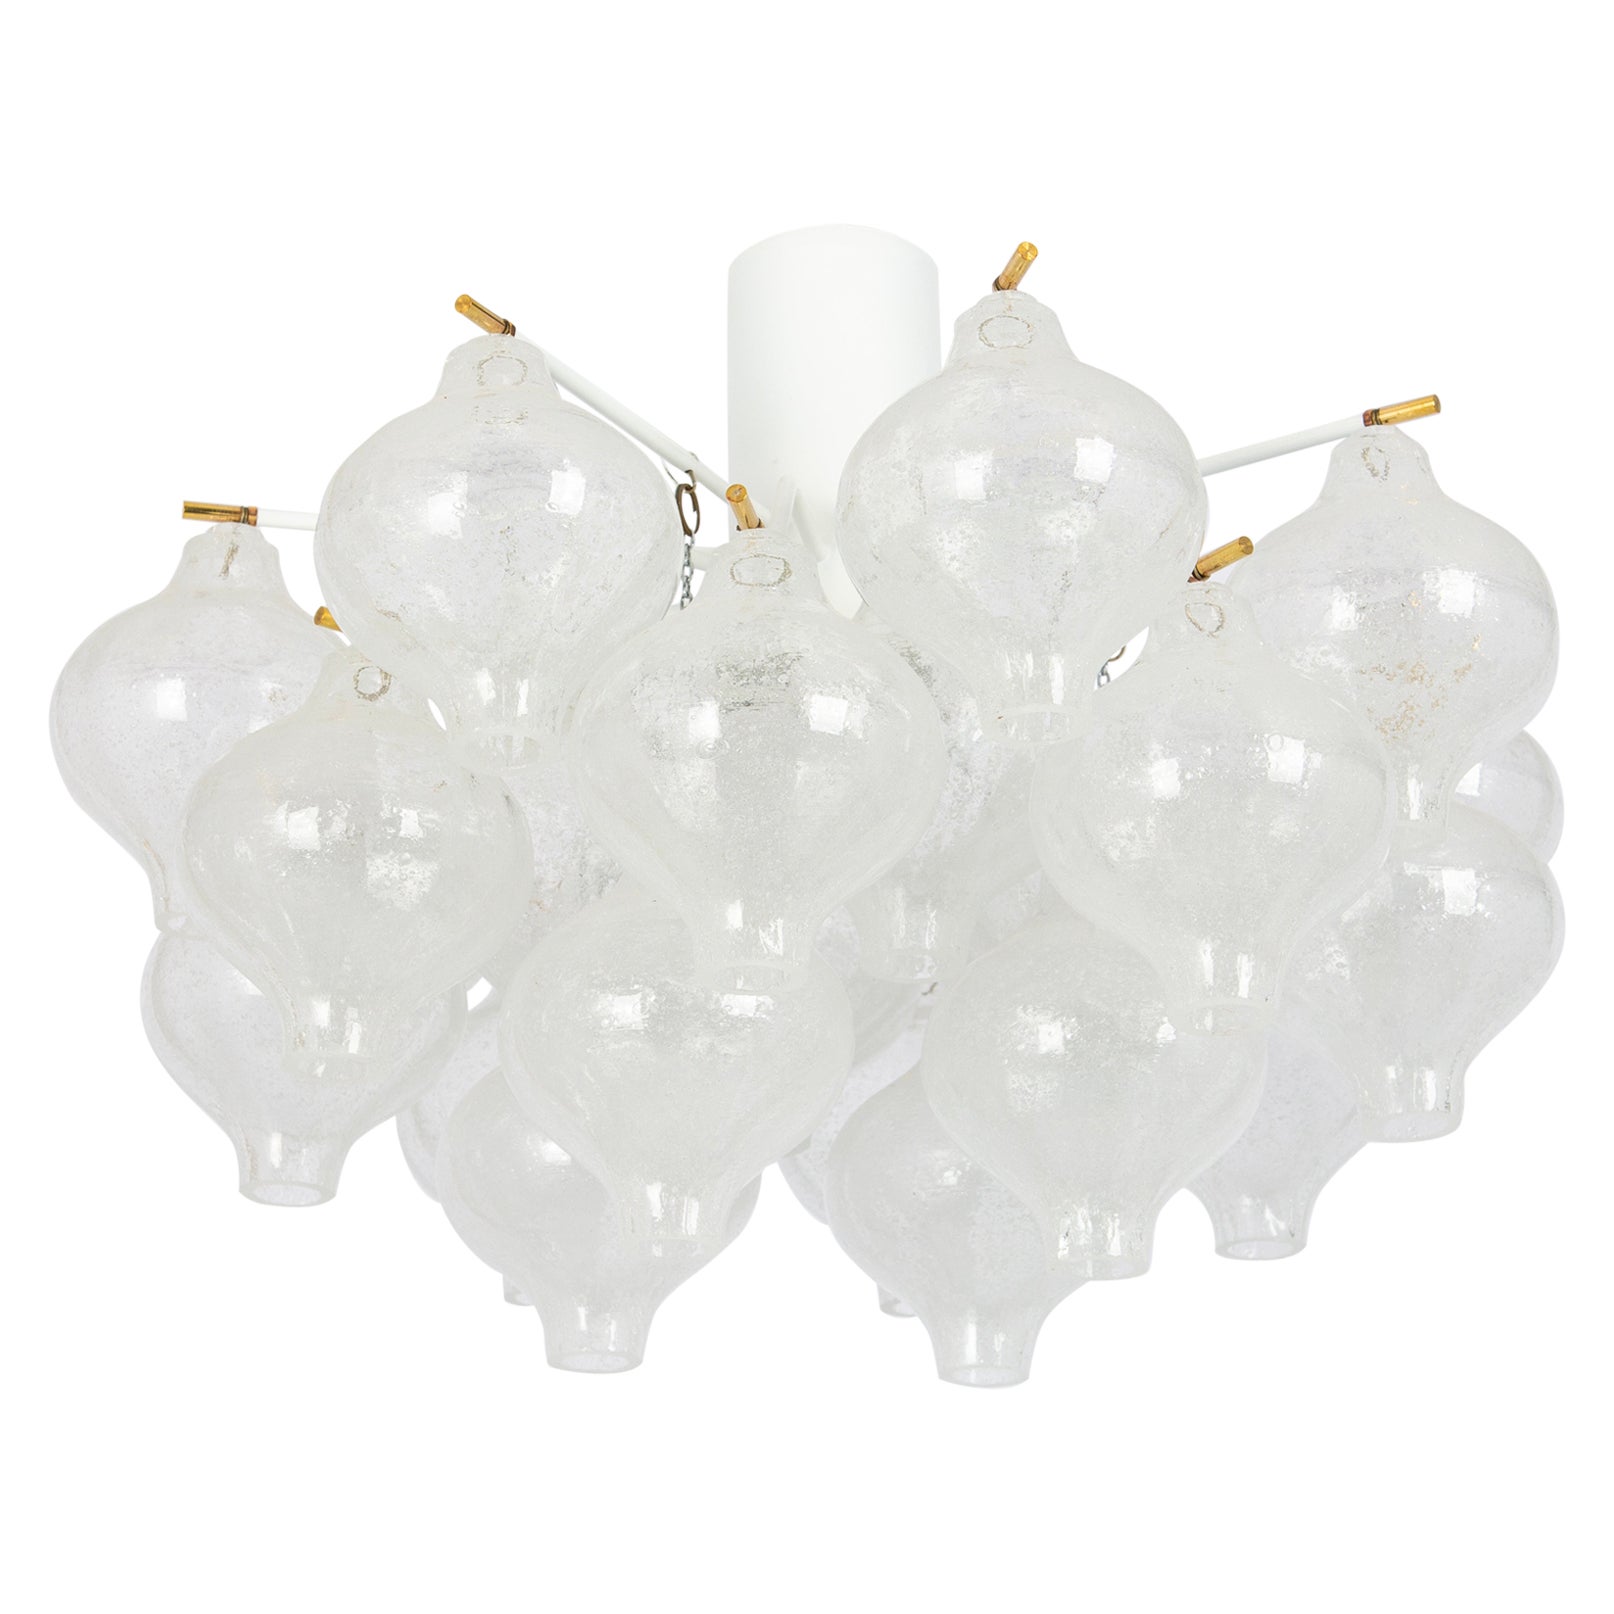 Wonderful onion-shaped -Tulipan glass Flush mount light. Twenty-four hand-blown glasses suspended on a white colored metal frame.
Best of design from the 1960s by Kalmar, Austria. High quality of the materials.
Beyond its practical function, the